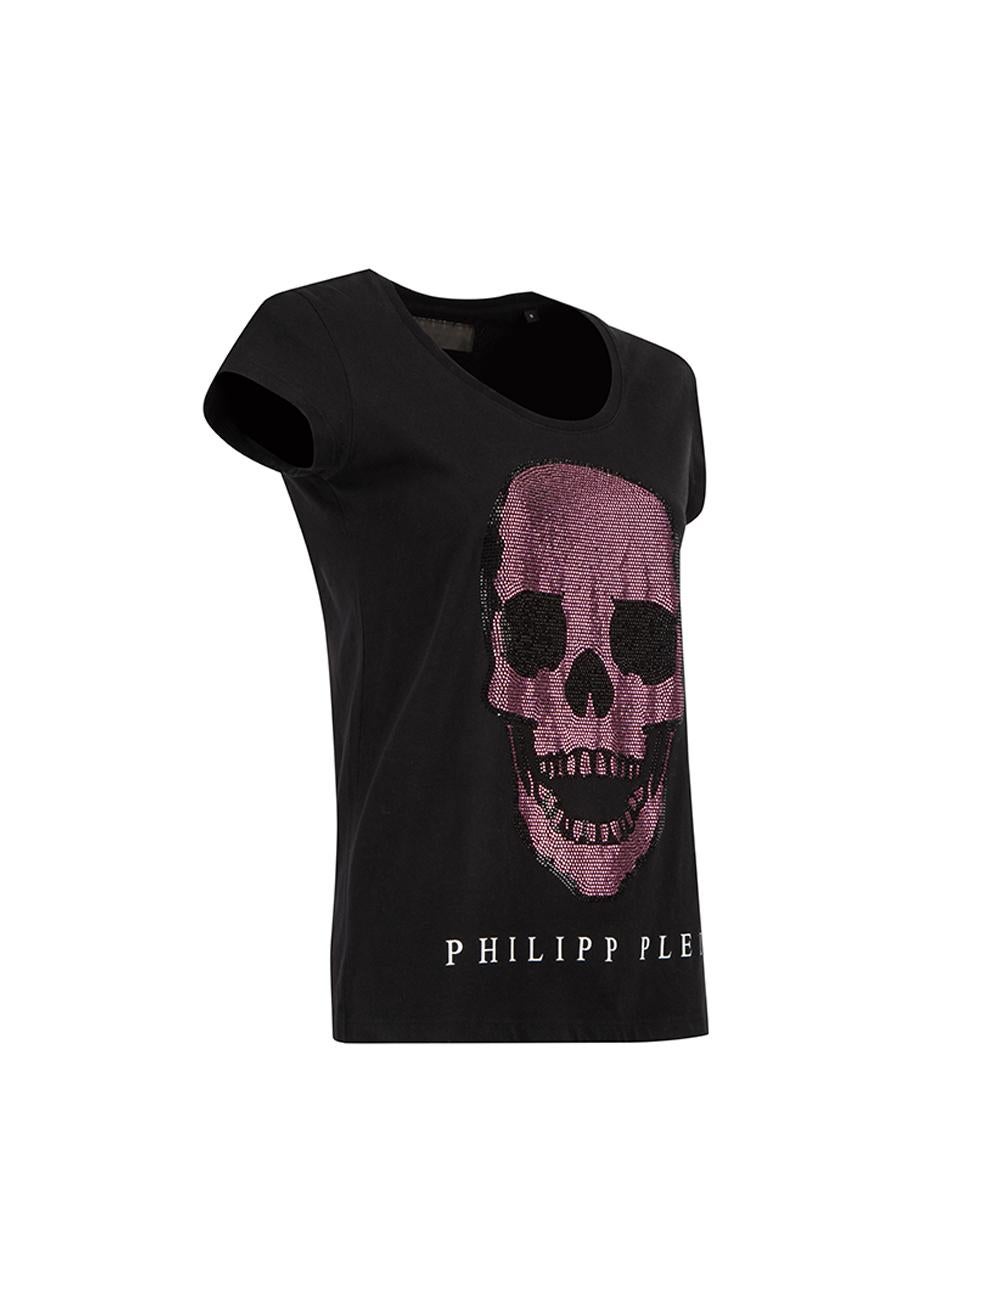 CONDITION is Very good. Hardly any visible wear to t-shirt is evident on this used Philipp Plein Couture designer resale item.   Details  Black Cotton T shirt Round neckline Pink skull gemstone embellishment Branded logo plate on back    Composition